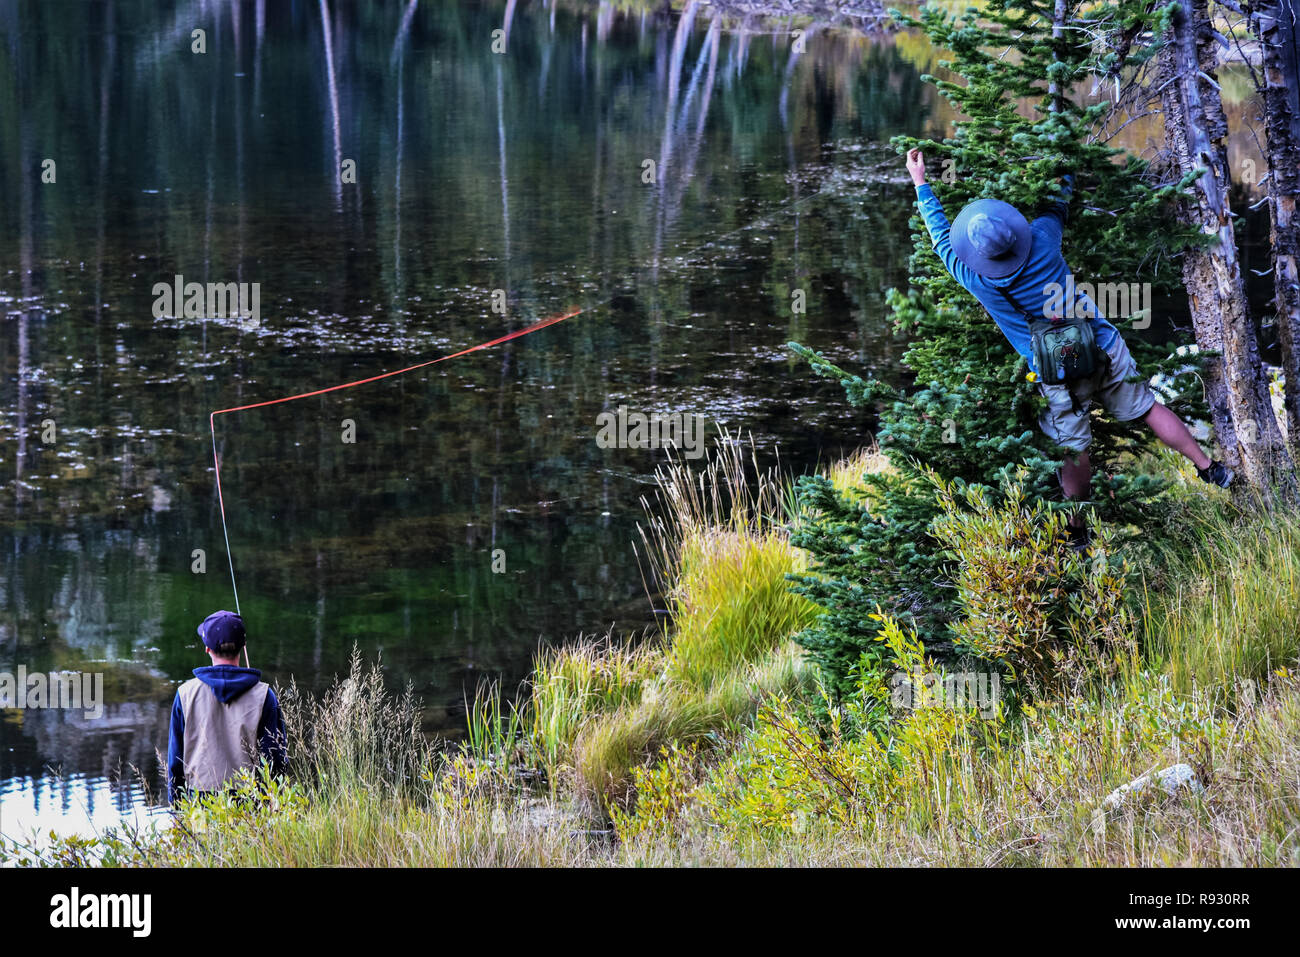 Retrieving a fly from a pine tree while teaching his son to fly fish. Stock Photo